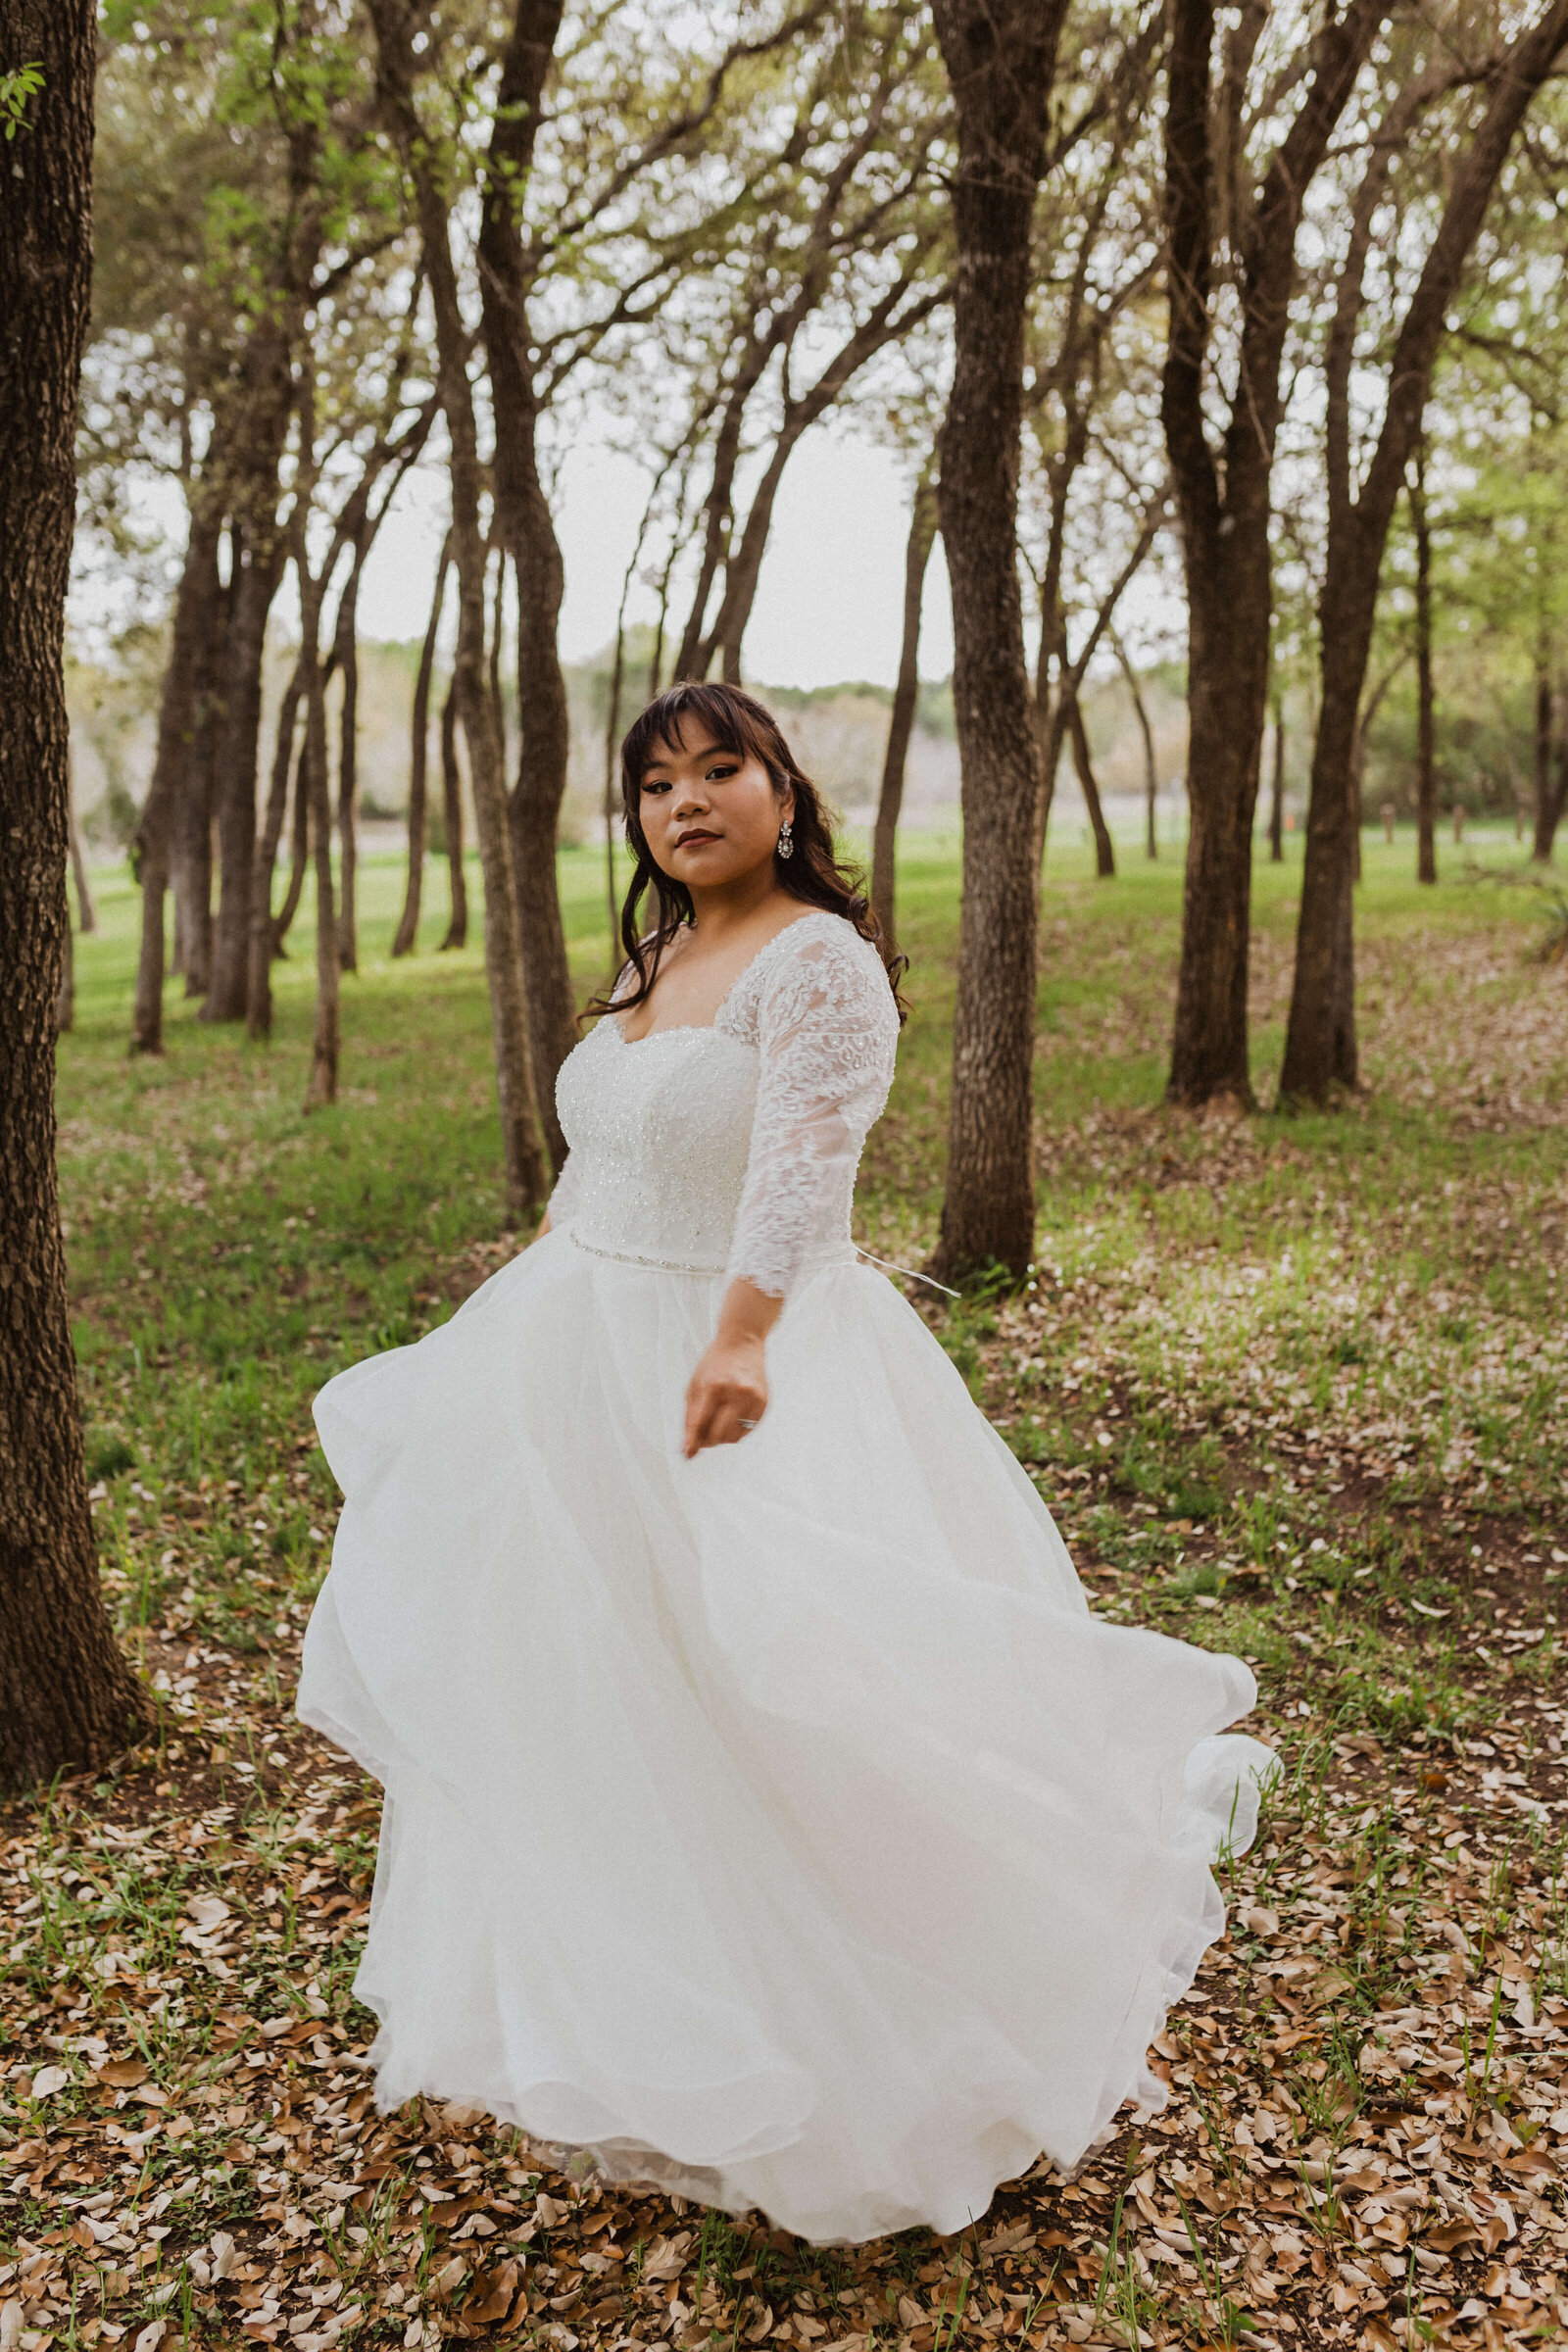 Stunning Bride in Nature by TLC Photography